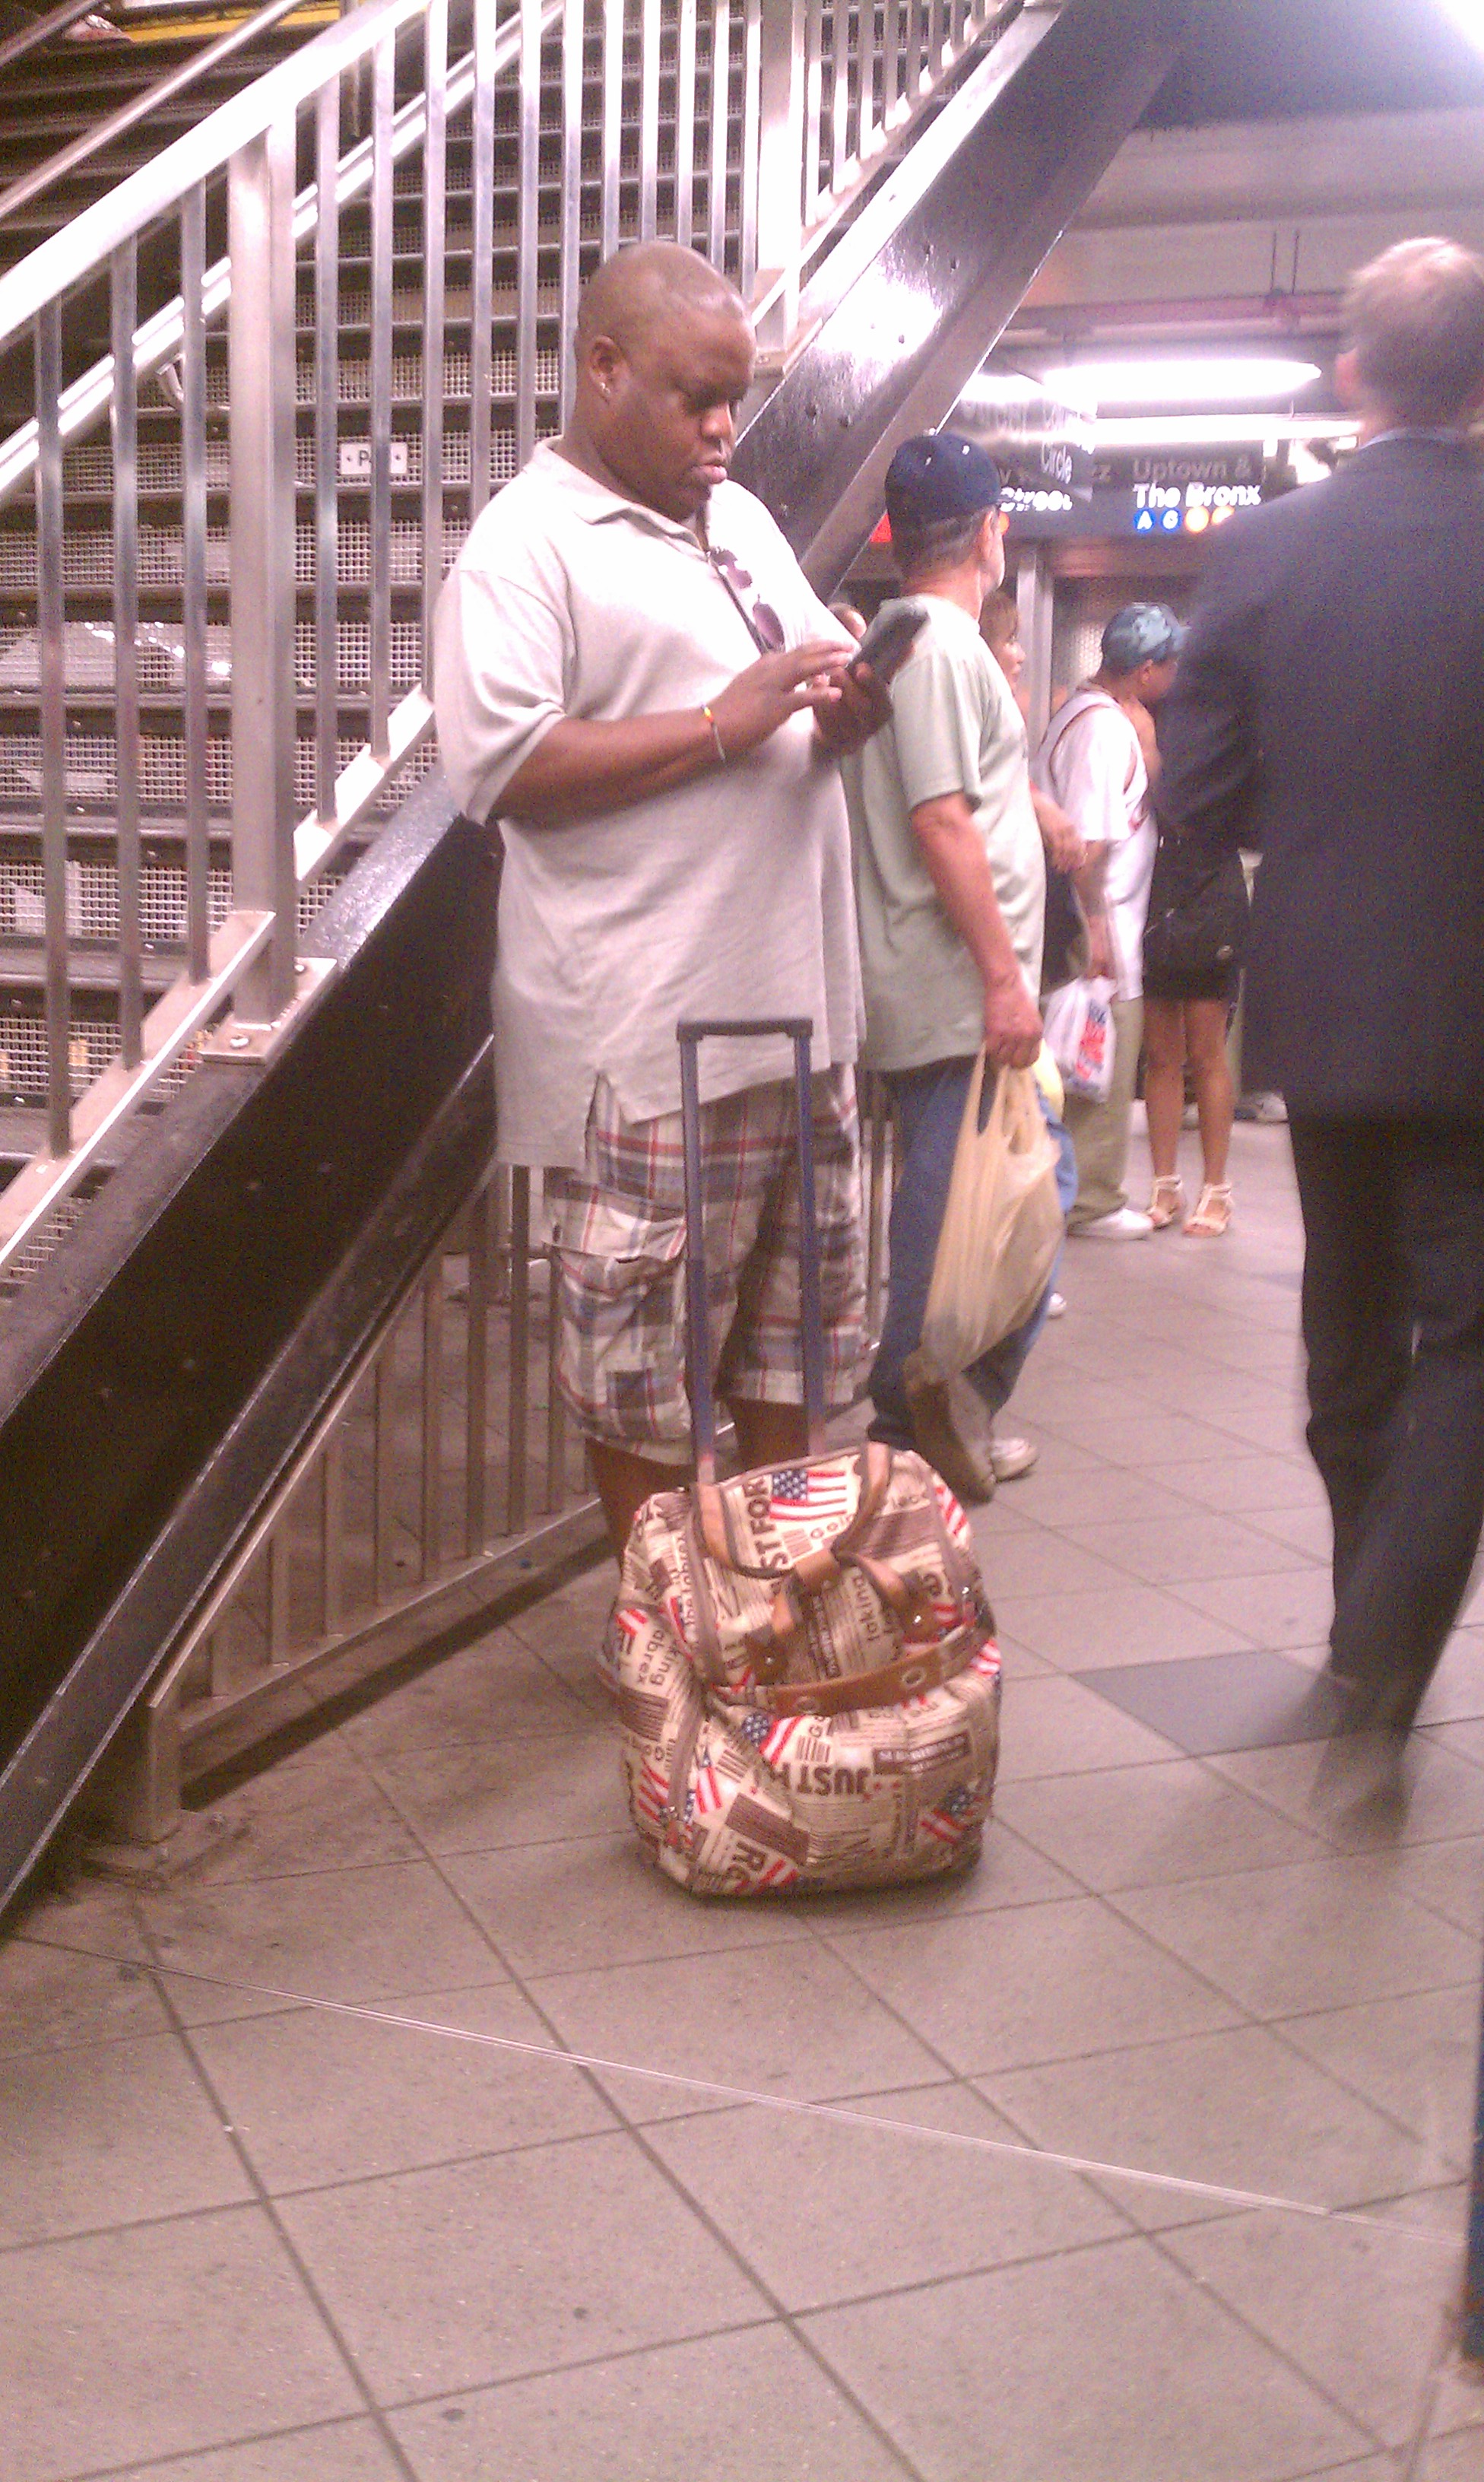 Notice his rolling American flag backpack.